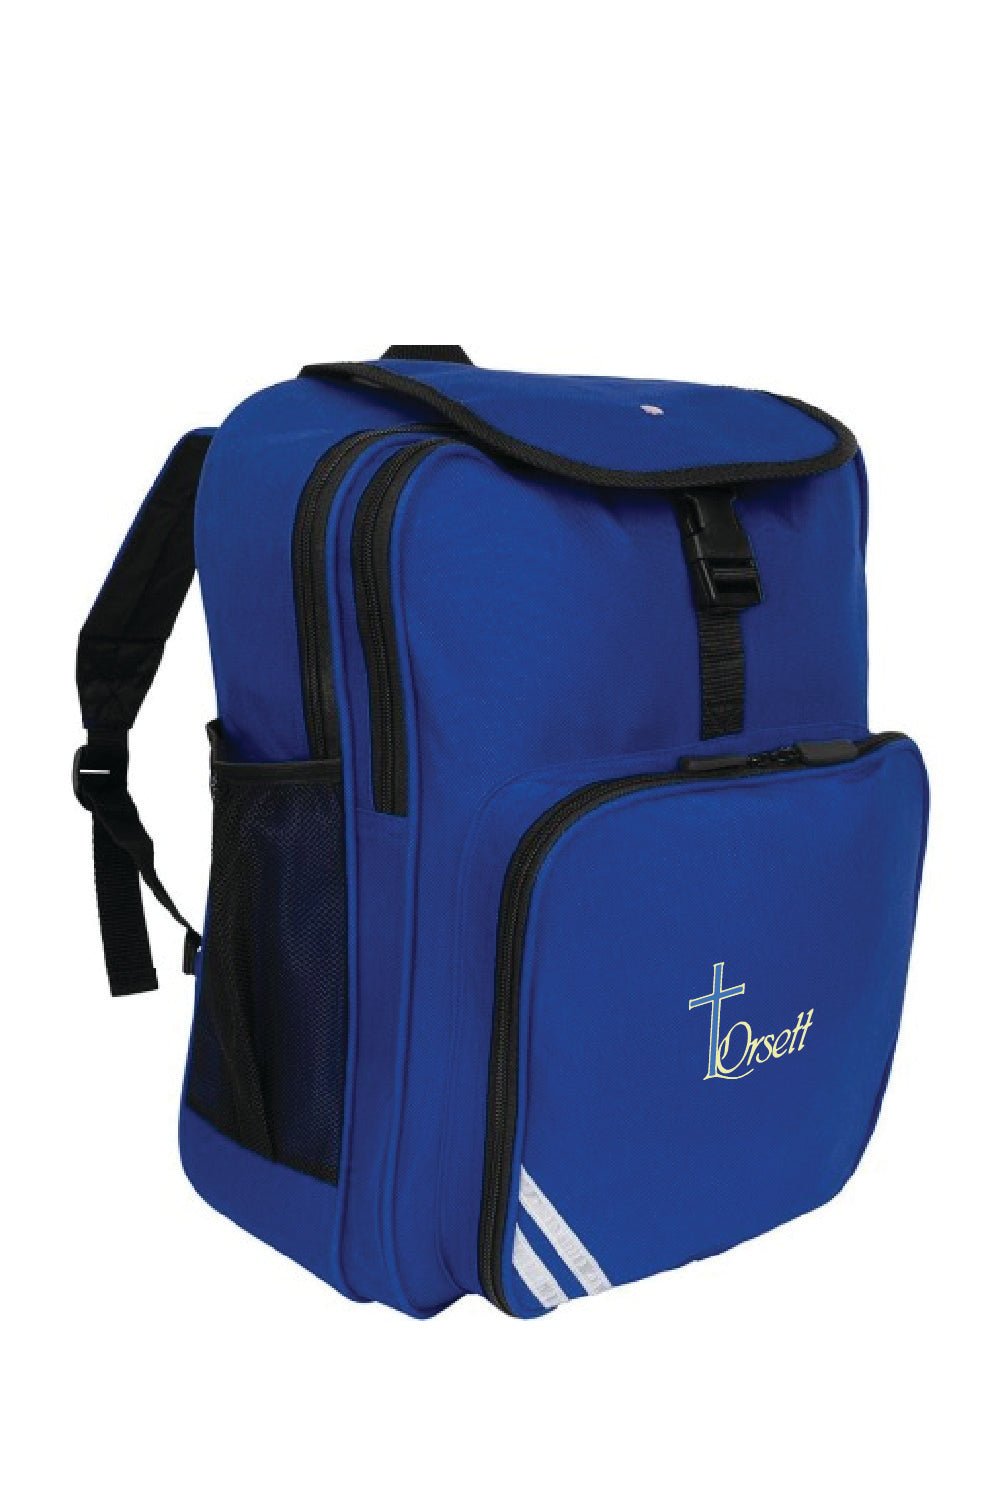 Orsett Primary Junior back pack with personalisation -new logo - Uniformwise Schoolwear